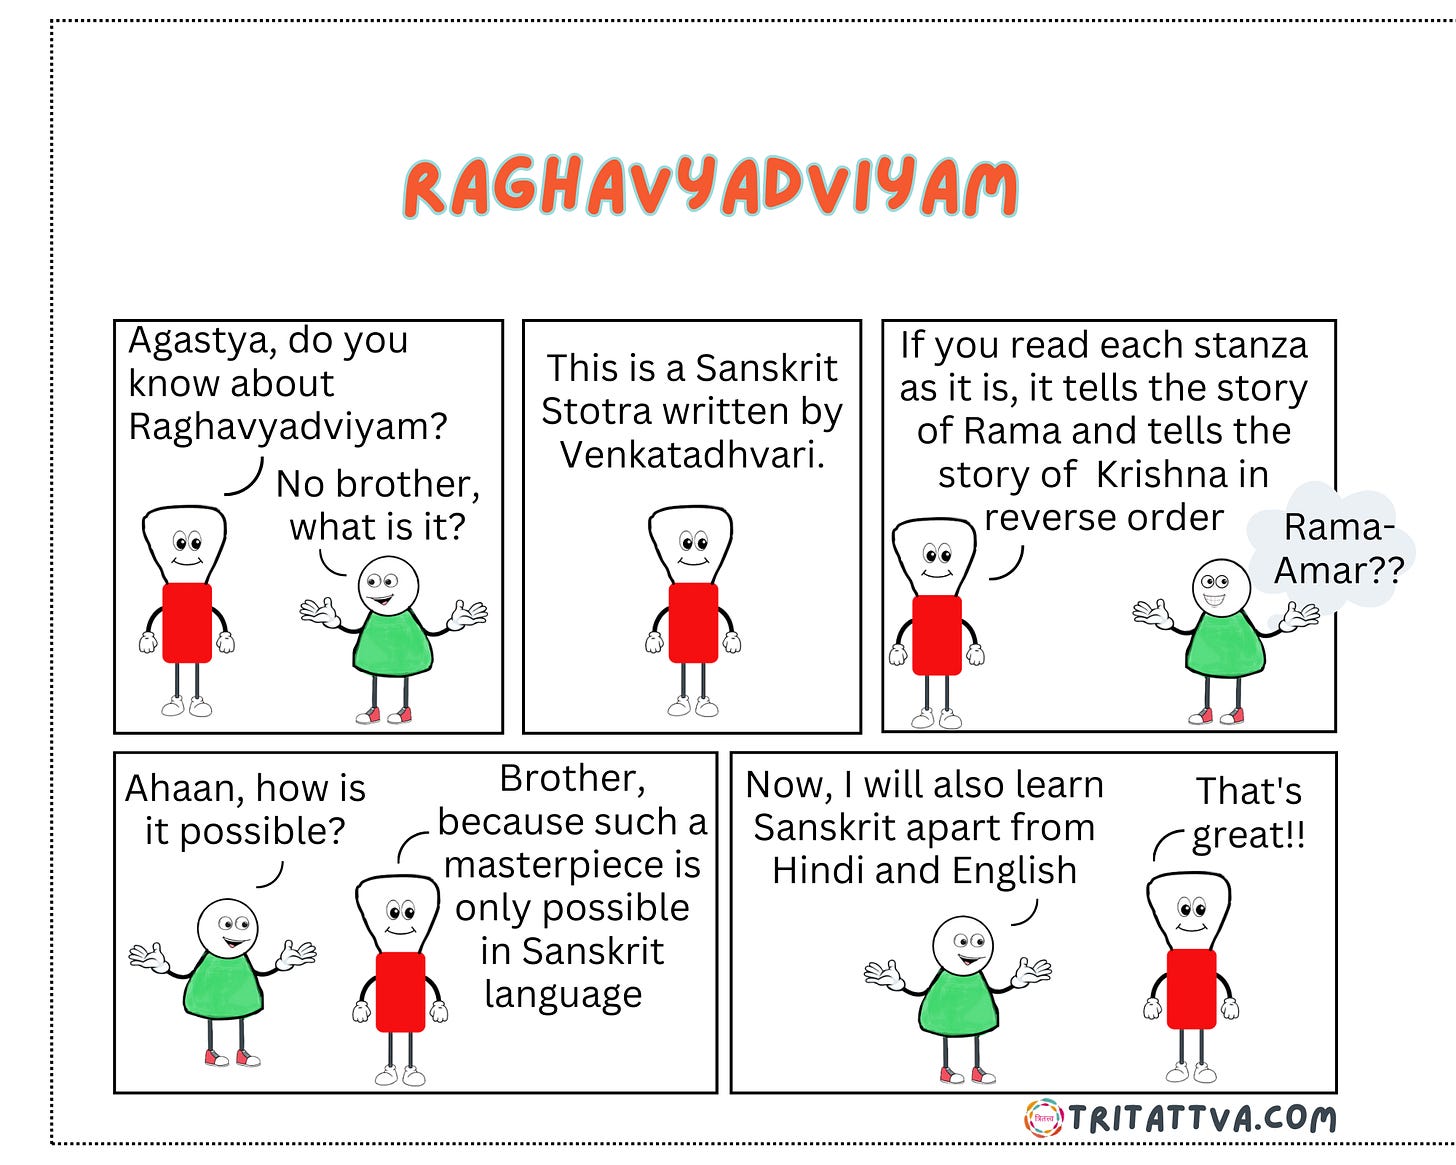 TriTattva's comic strip which tells about the unique Sanskrit poem Raghavyadviyam. It tells the story of Rama and Krishna together.